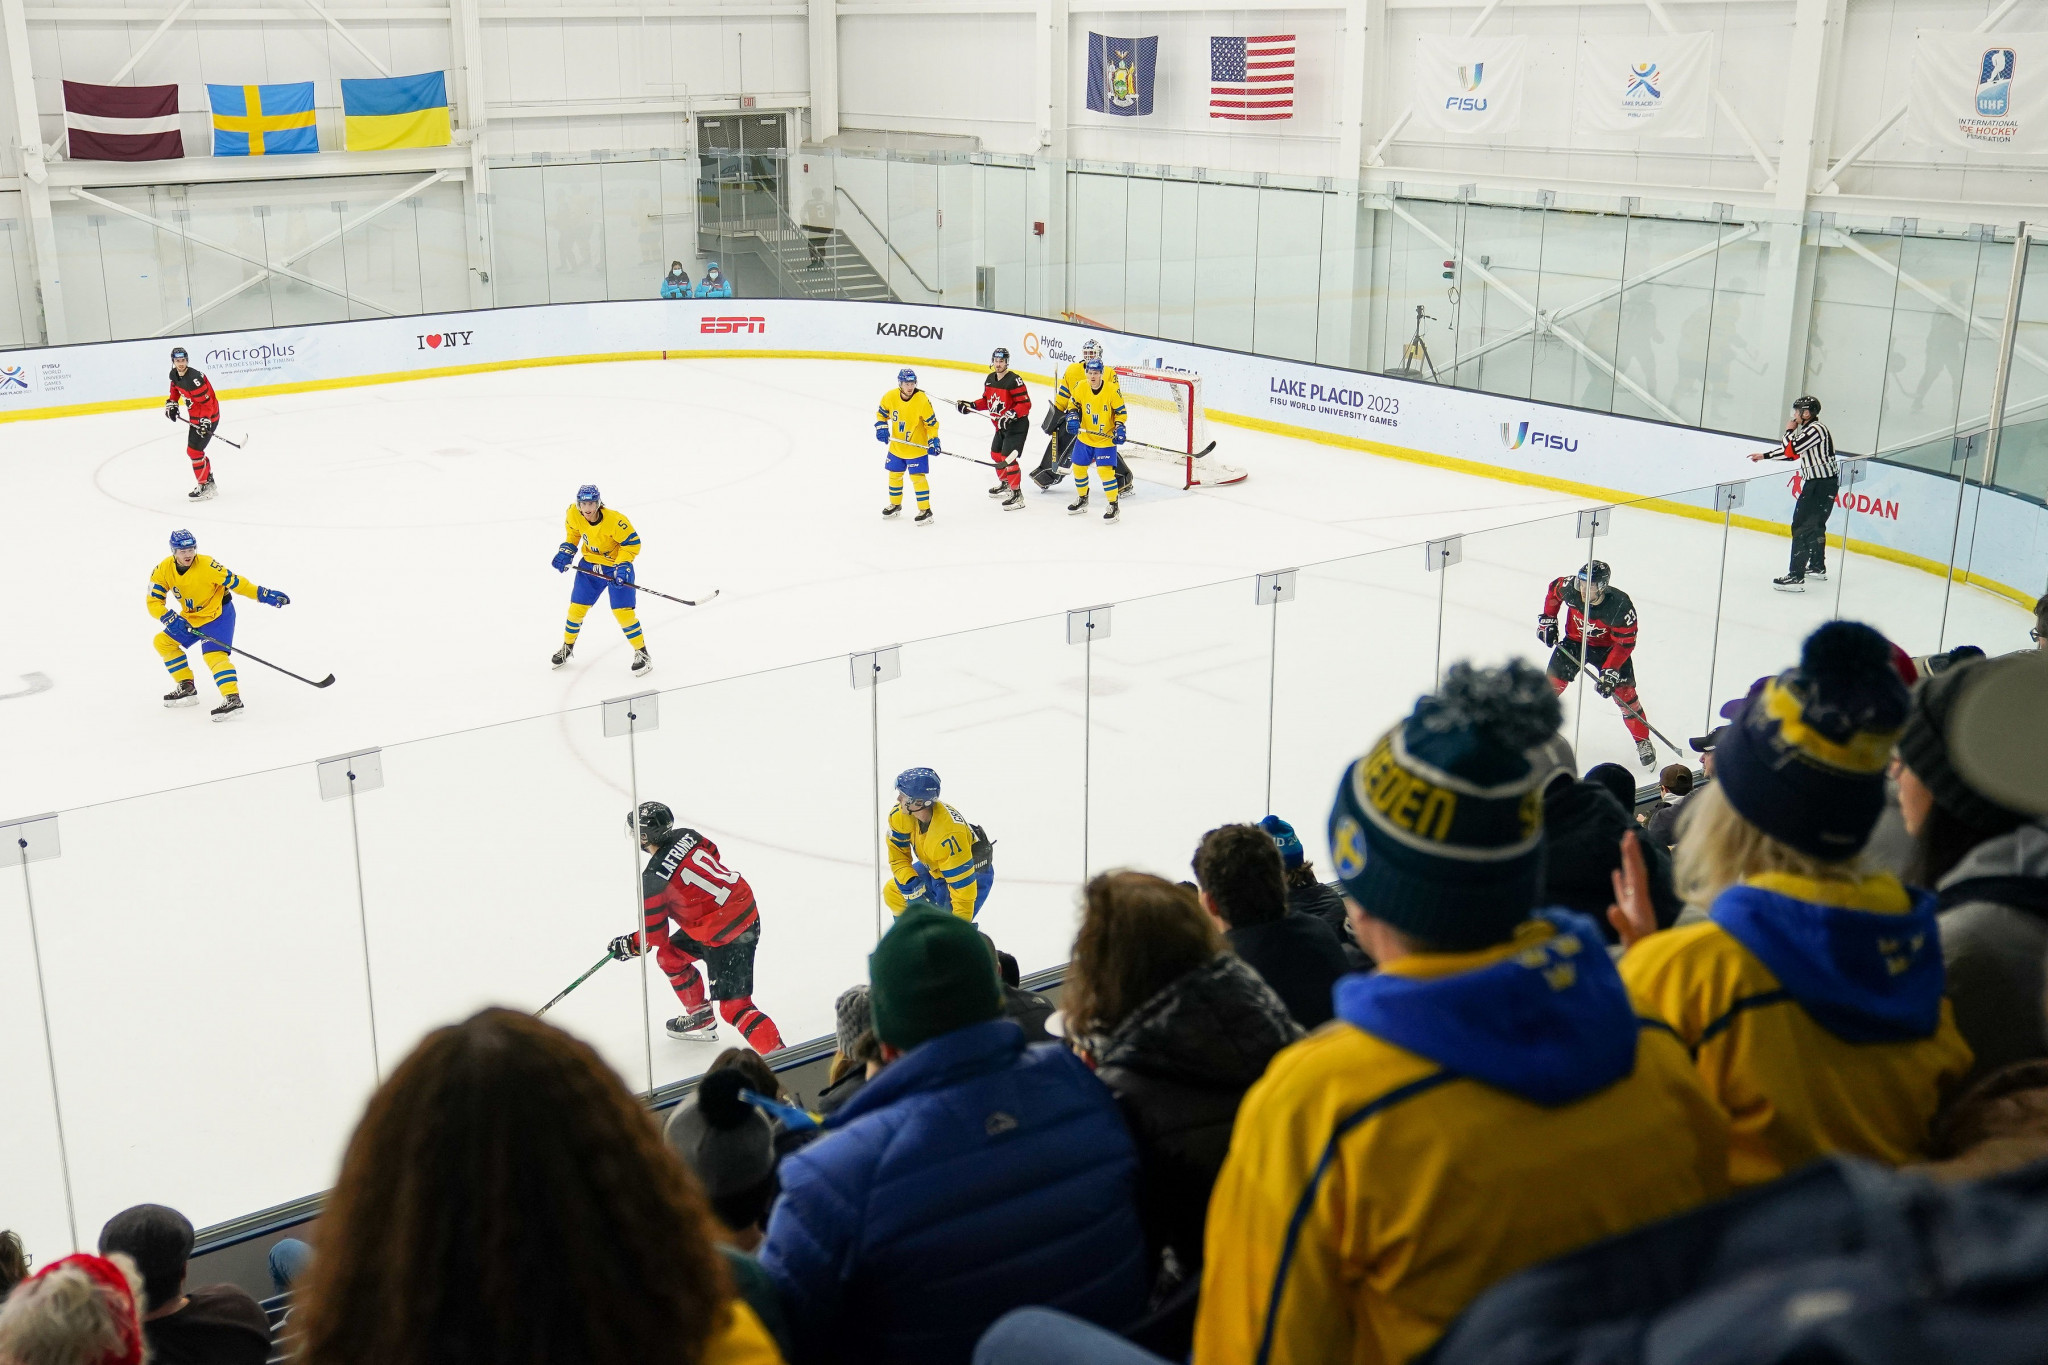 Sweden took on Canada in one of several ice hockey matches contested on the first day of competition ©FISU